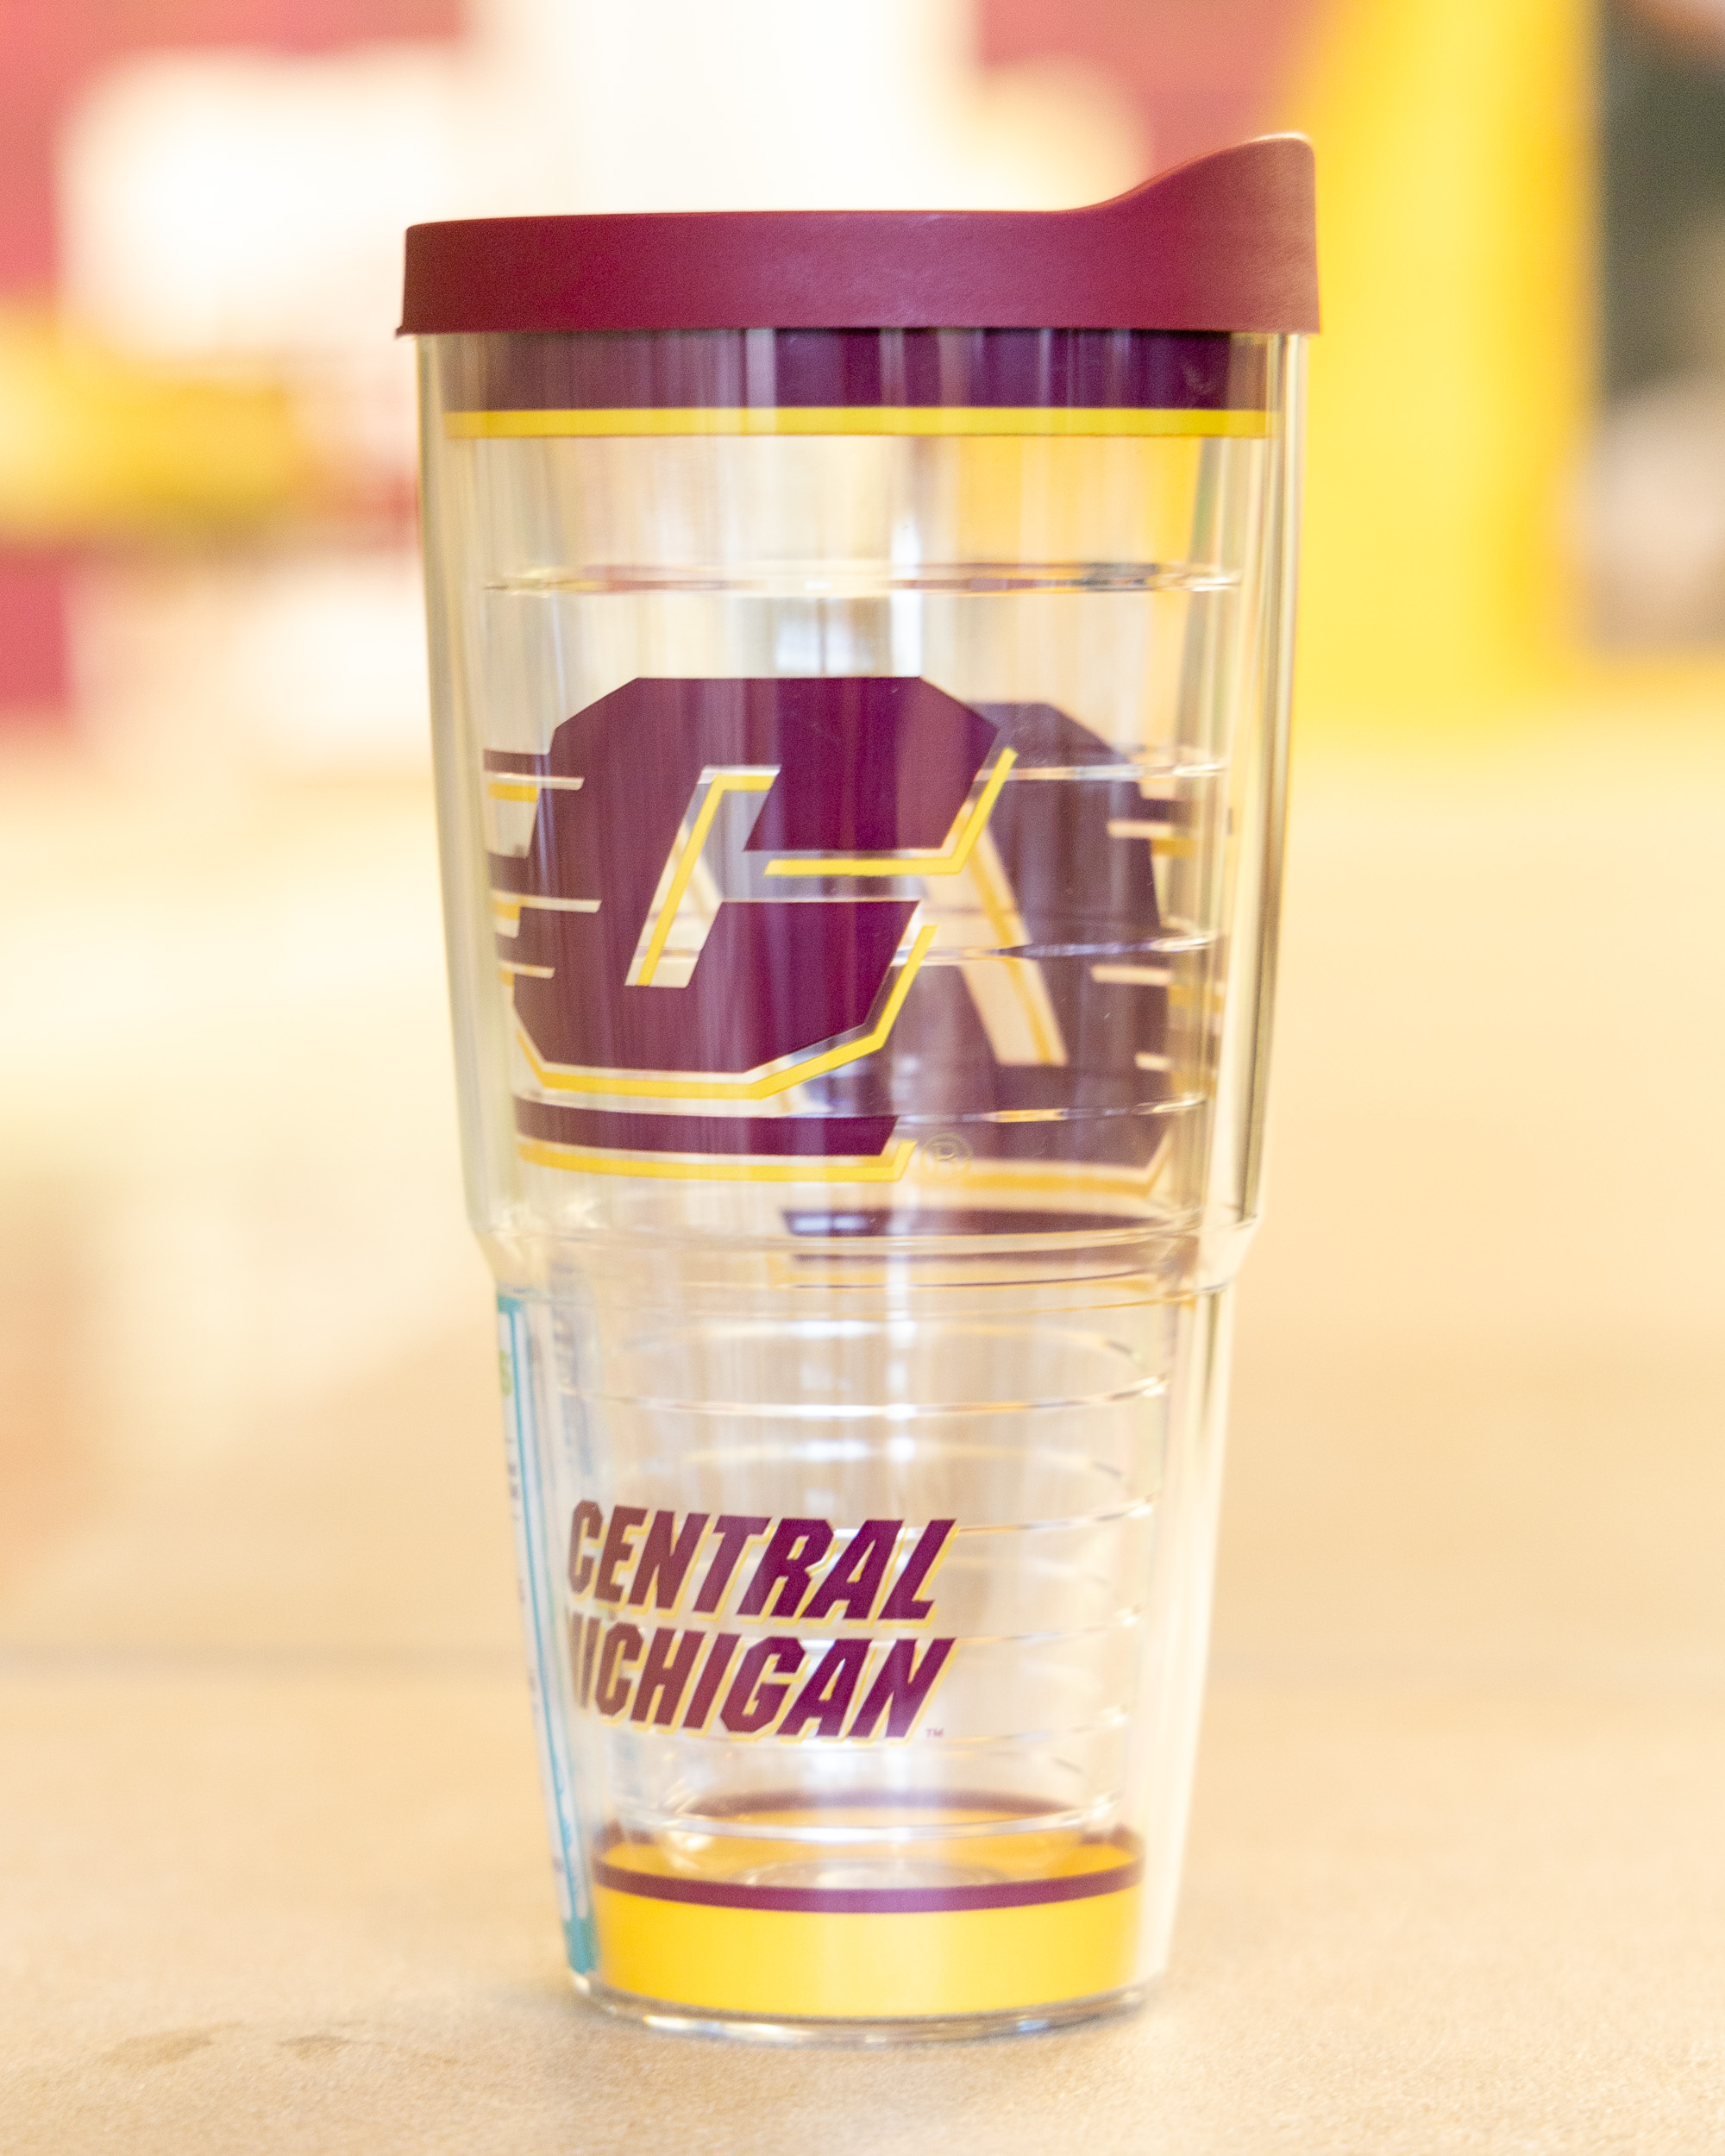 Action C Central Michigan 24 oz. Tumbler with Maroon Lid (SKU 5000128622)